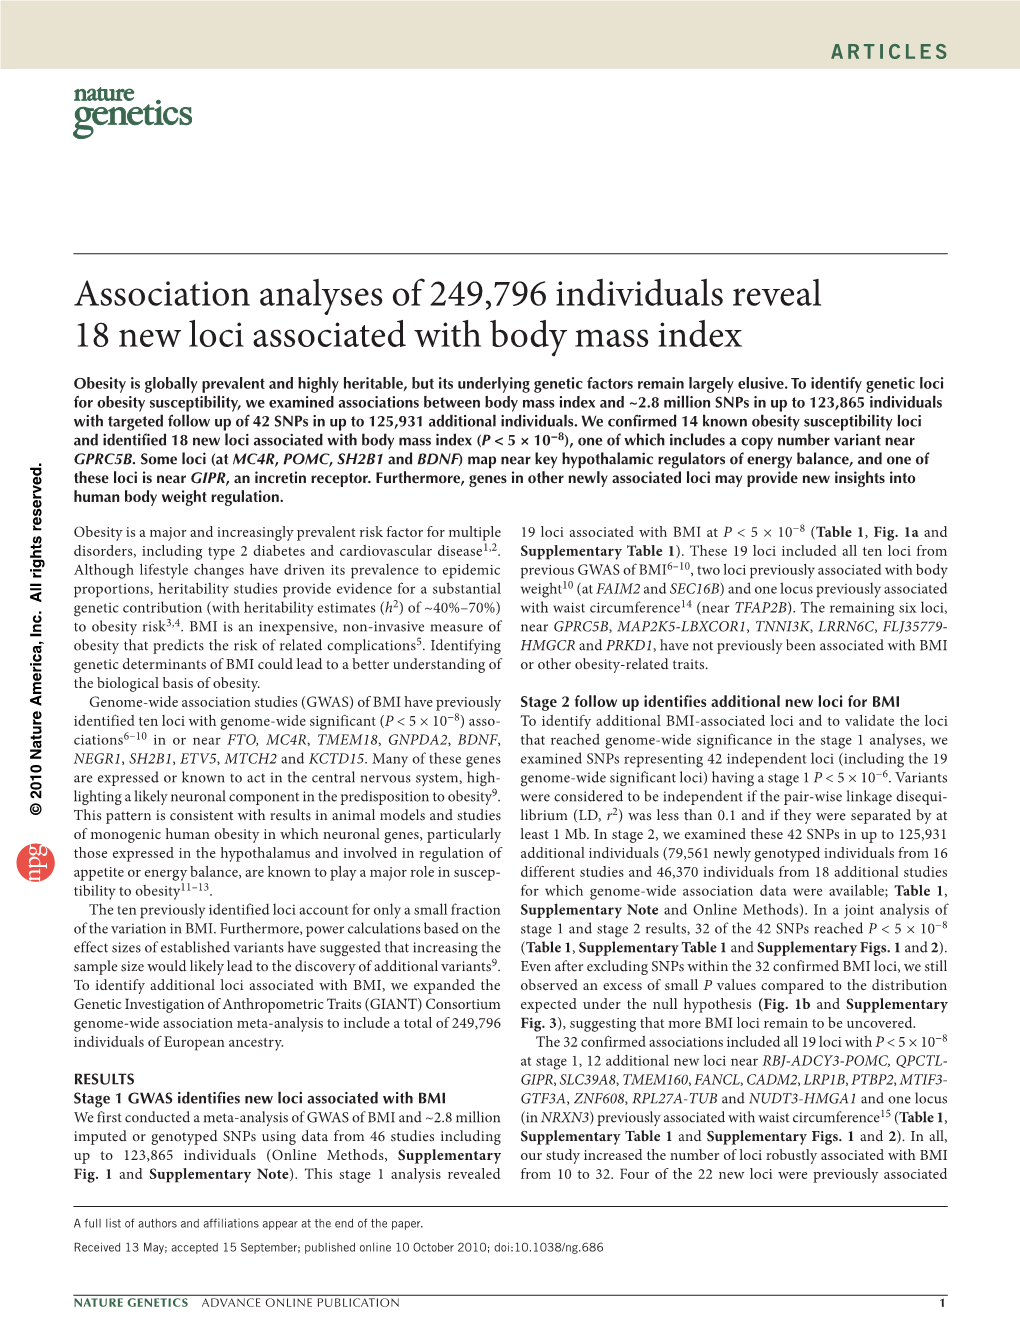 Association Analyses of 249,796 Individuals Reveal 18 New Loci